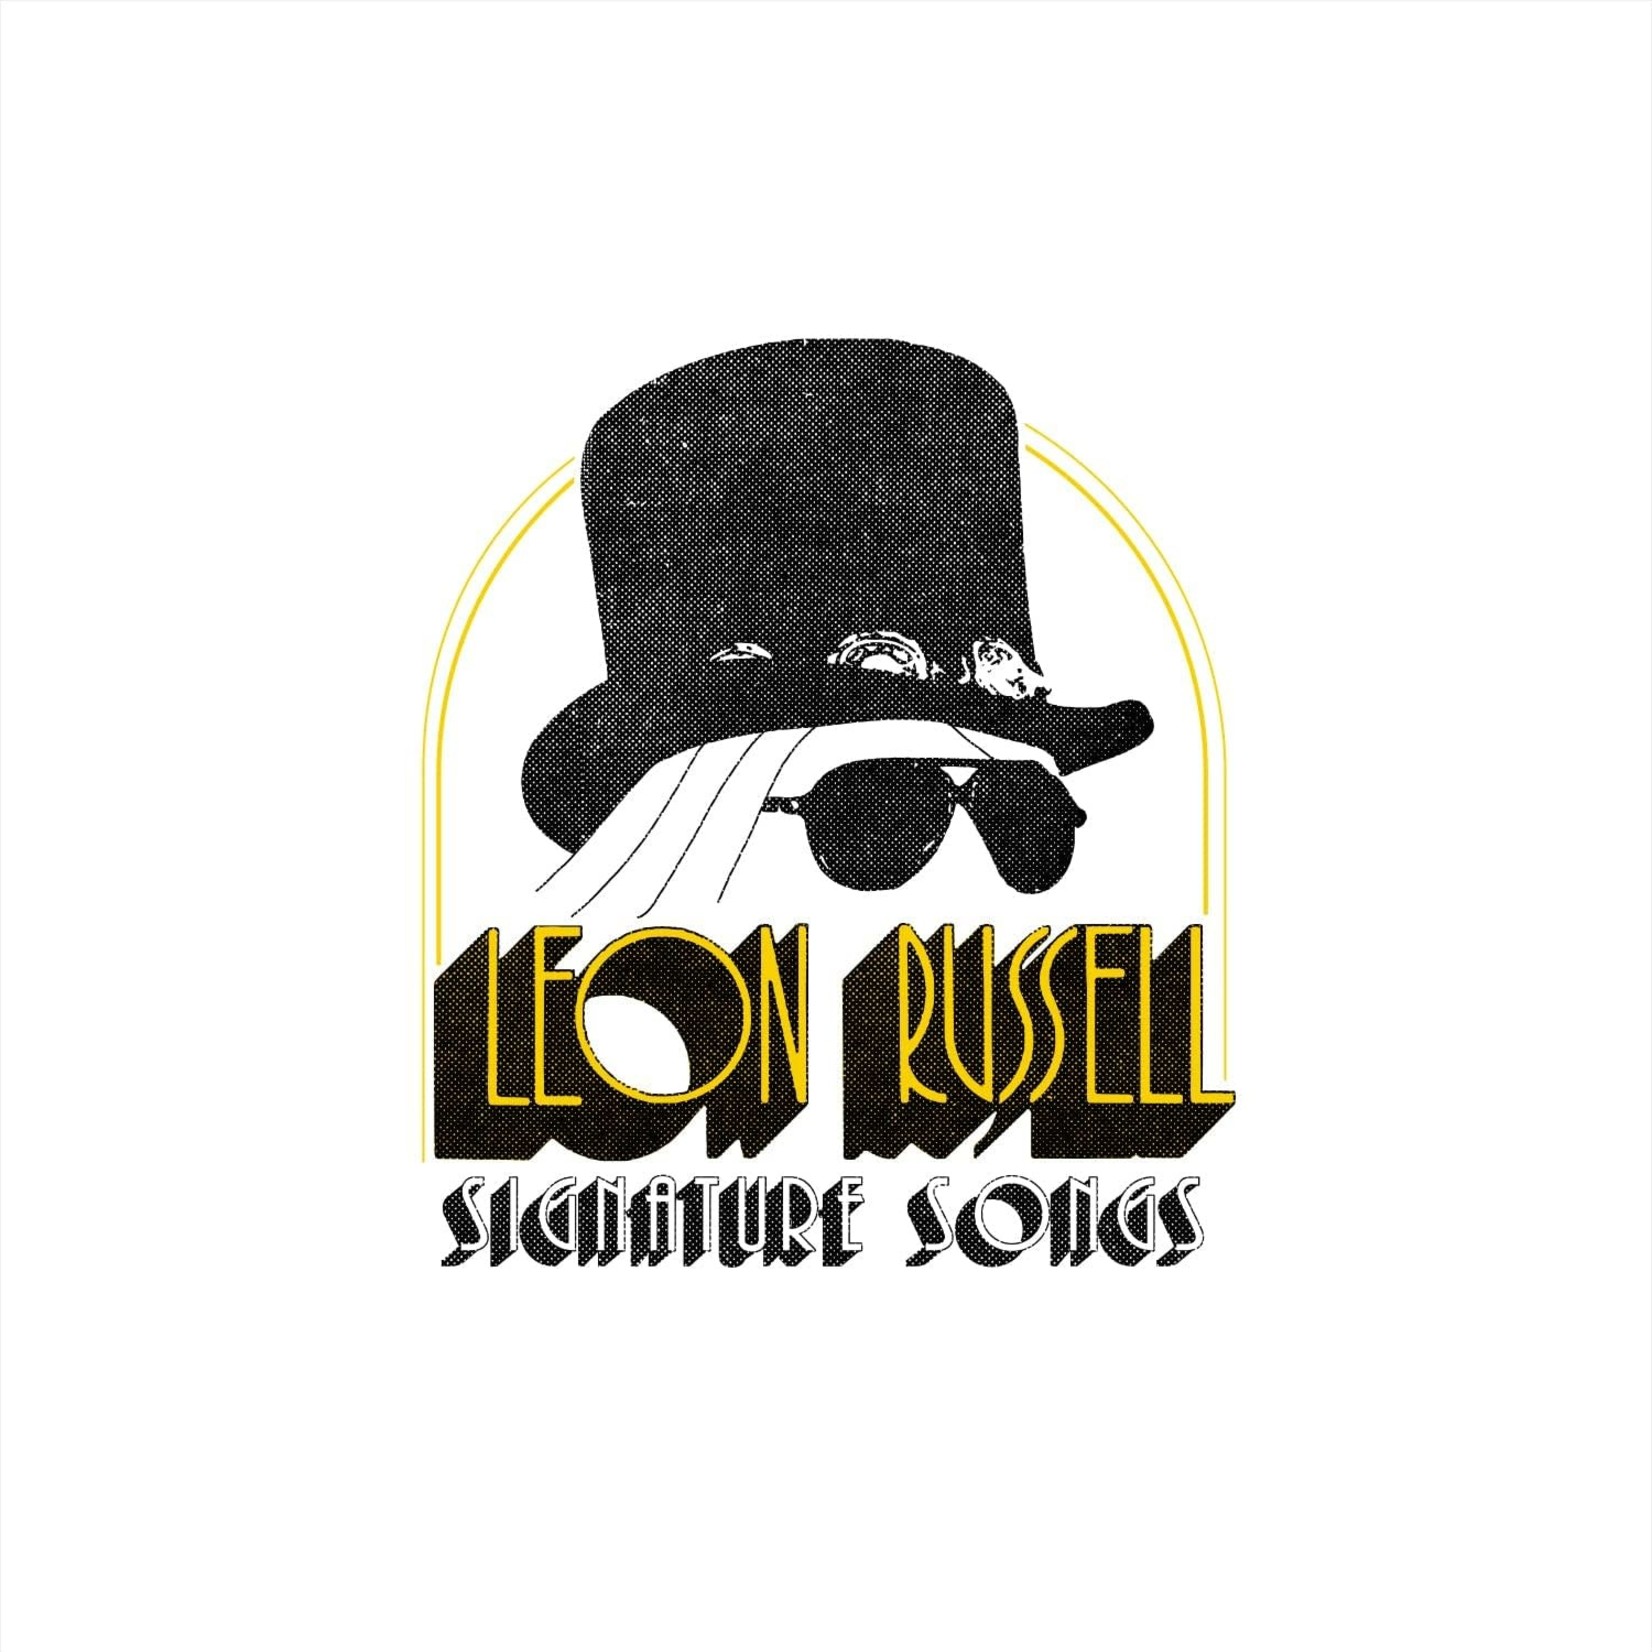 Leon Russell - Signature Songs [CD]